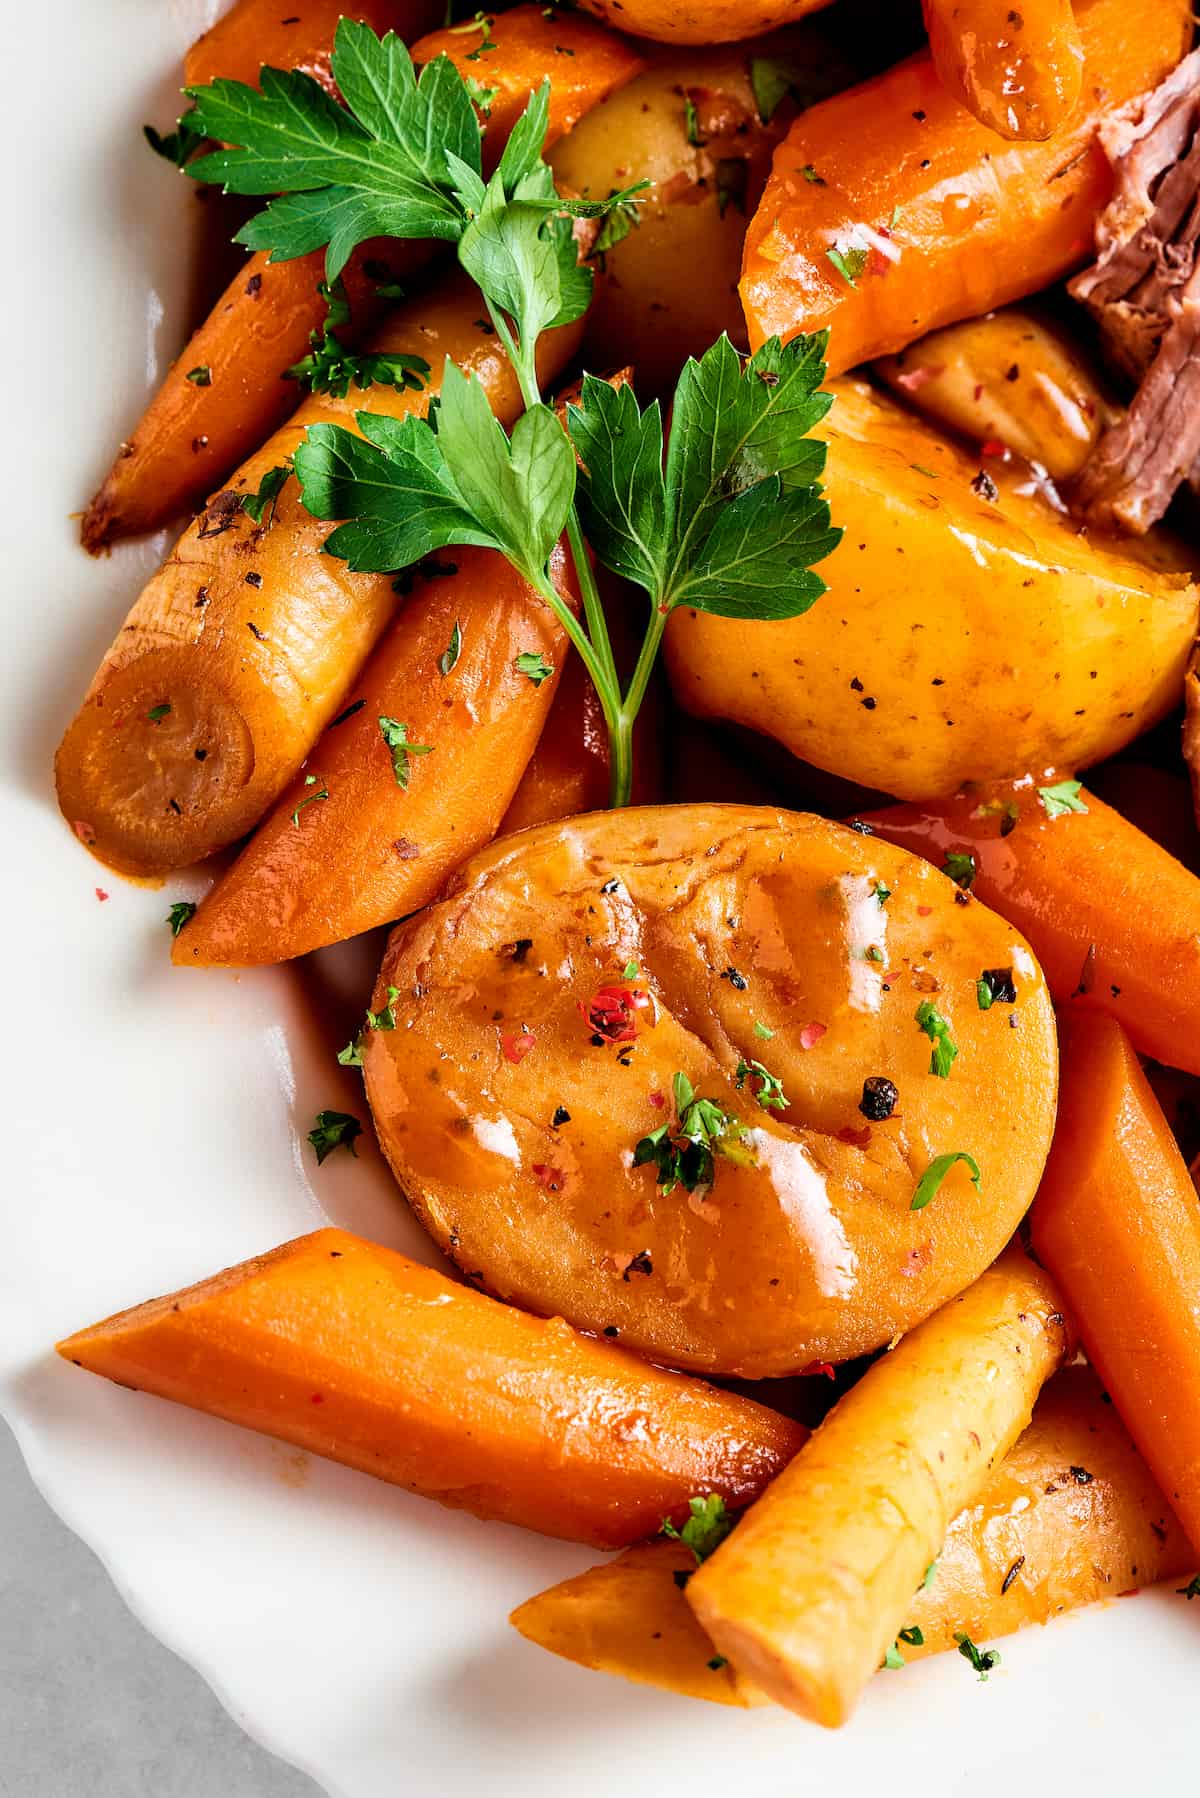 Close-up shot of cooked potatoes, carrots, and parsnips.